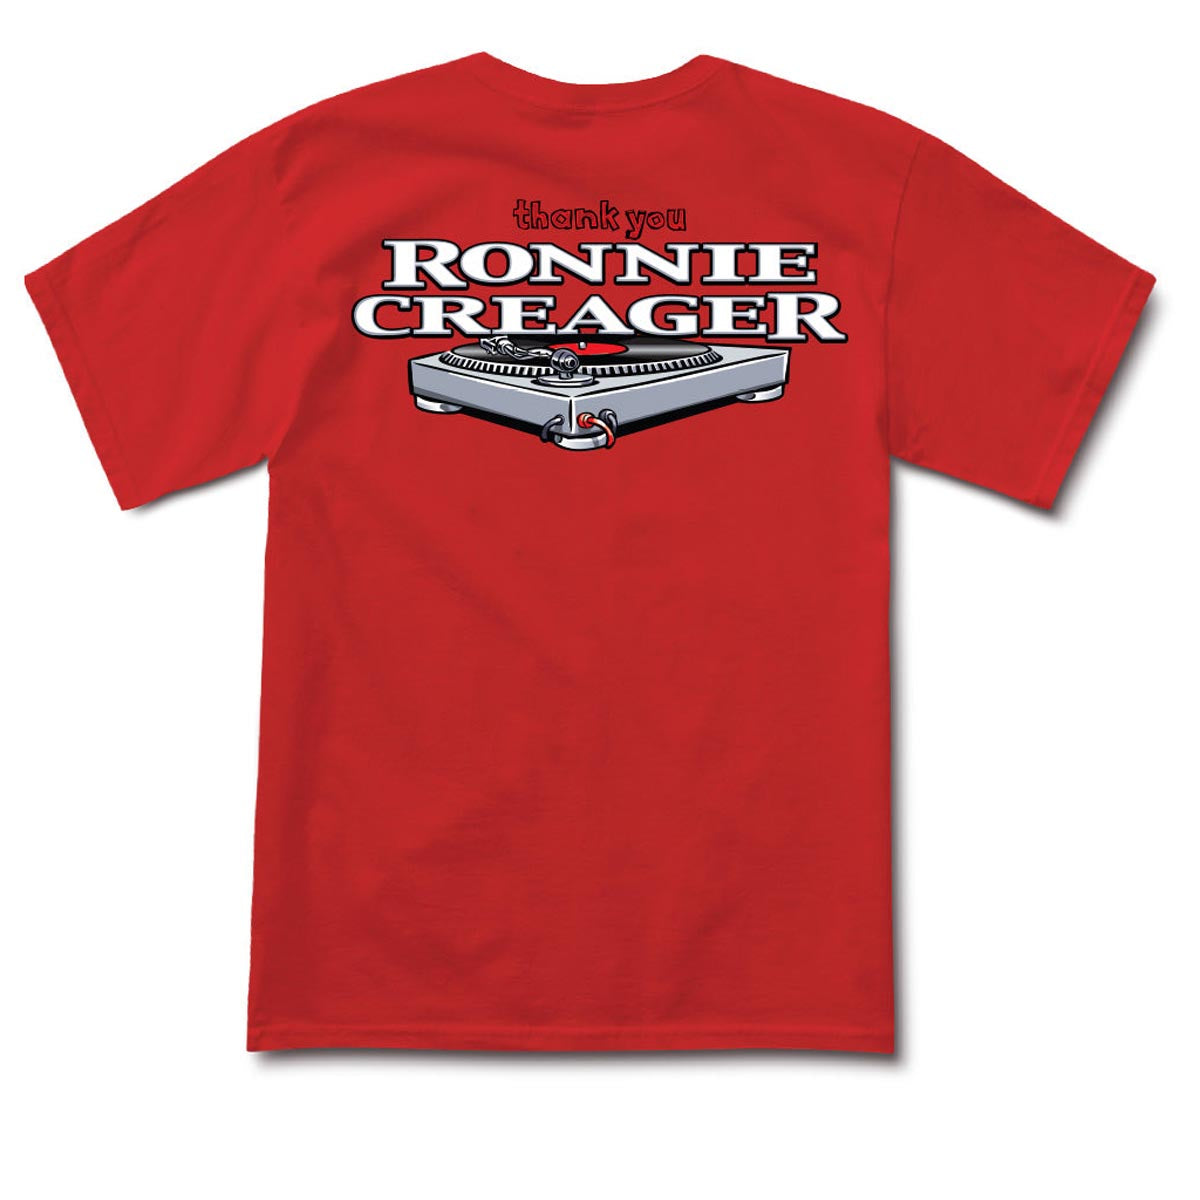 Thank You x Ronnie Creager Turntable T-Shirt - Red image 1